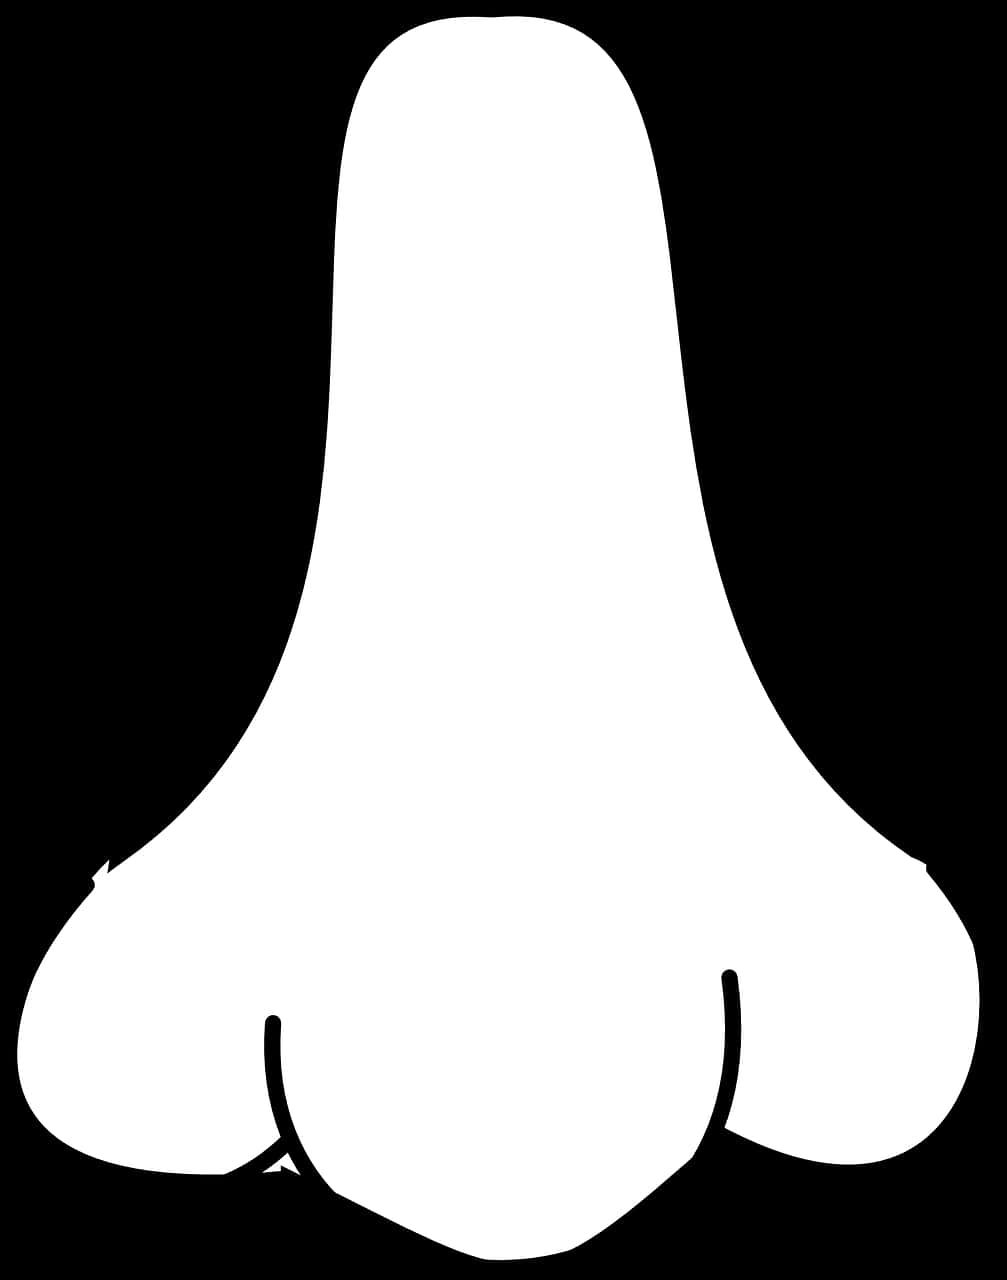 Simplified Nose Outline Graphic PNG image